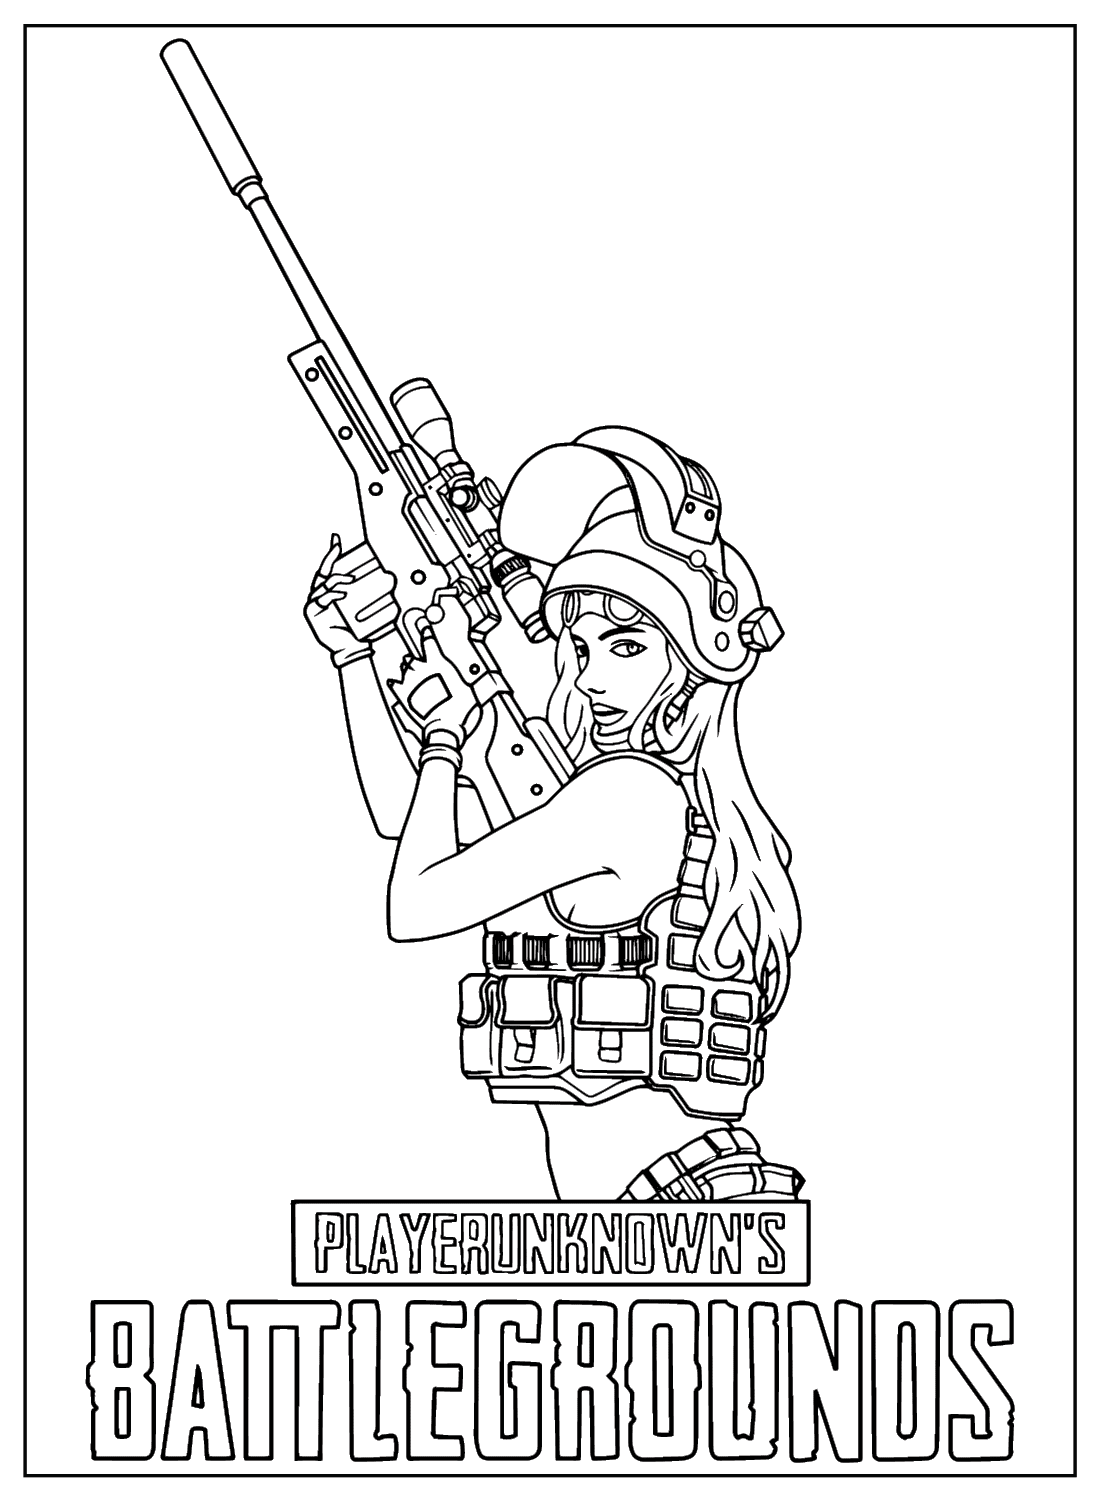 Battle Royale Game Girl Coloring Page from PUBG